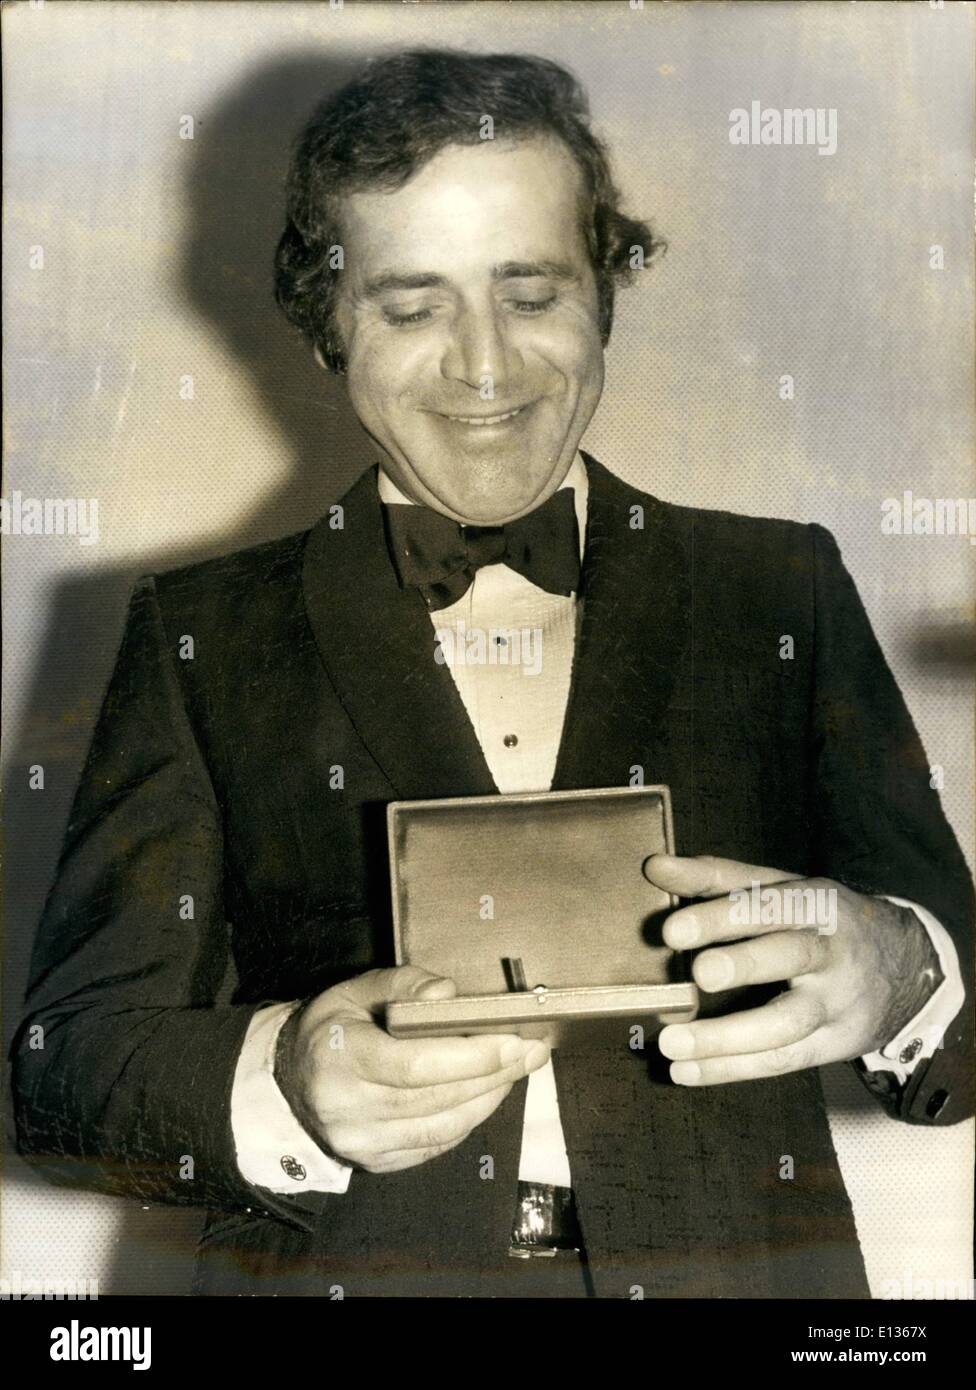 Feb. 28, 2012 - Cinema night trophy to Jean Yanne. A Cinema Night trophy was awarded to Jean Yanne, former T.V. entertainer and comedian, now actor and author. OPS: Jean Yanne pictured with his award. Nov. 24/72 Stock Photo